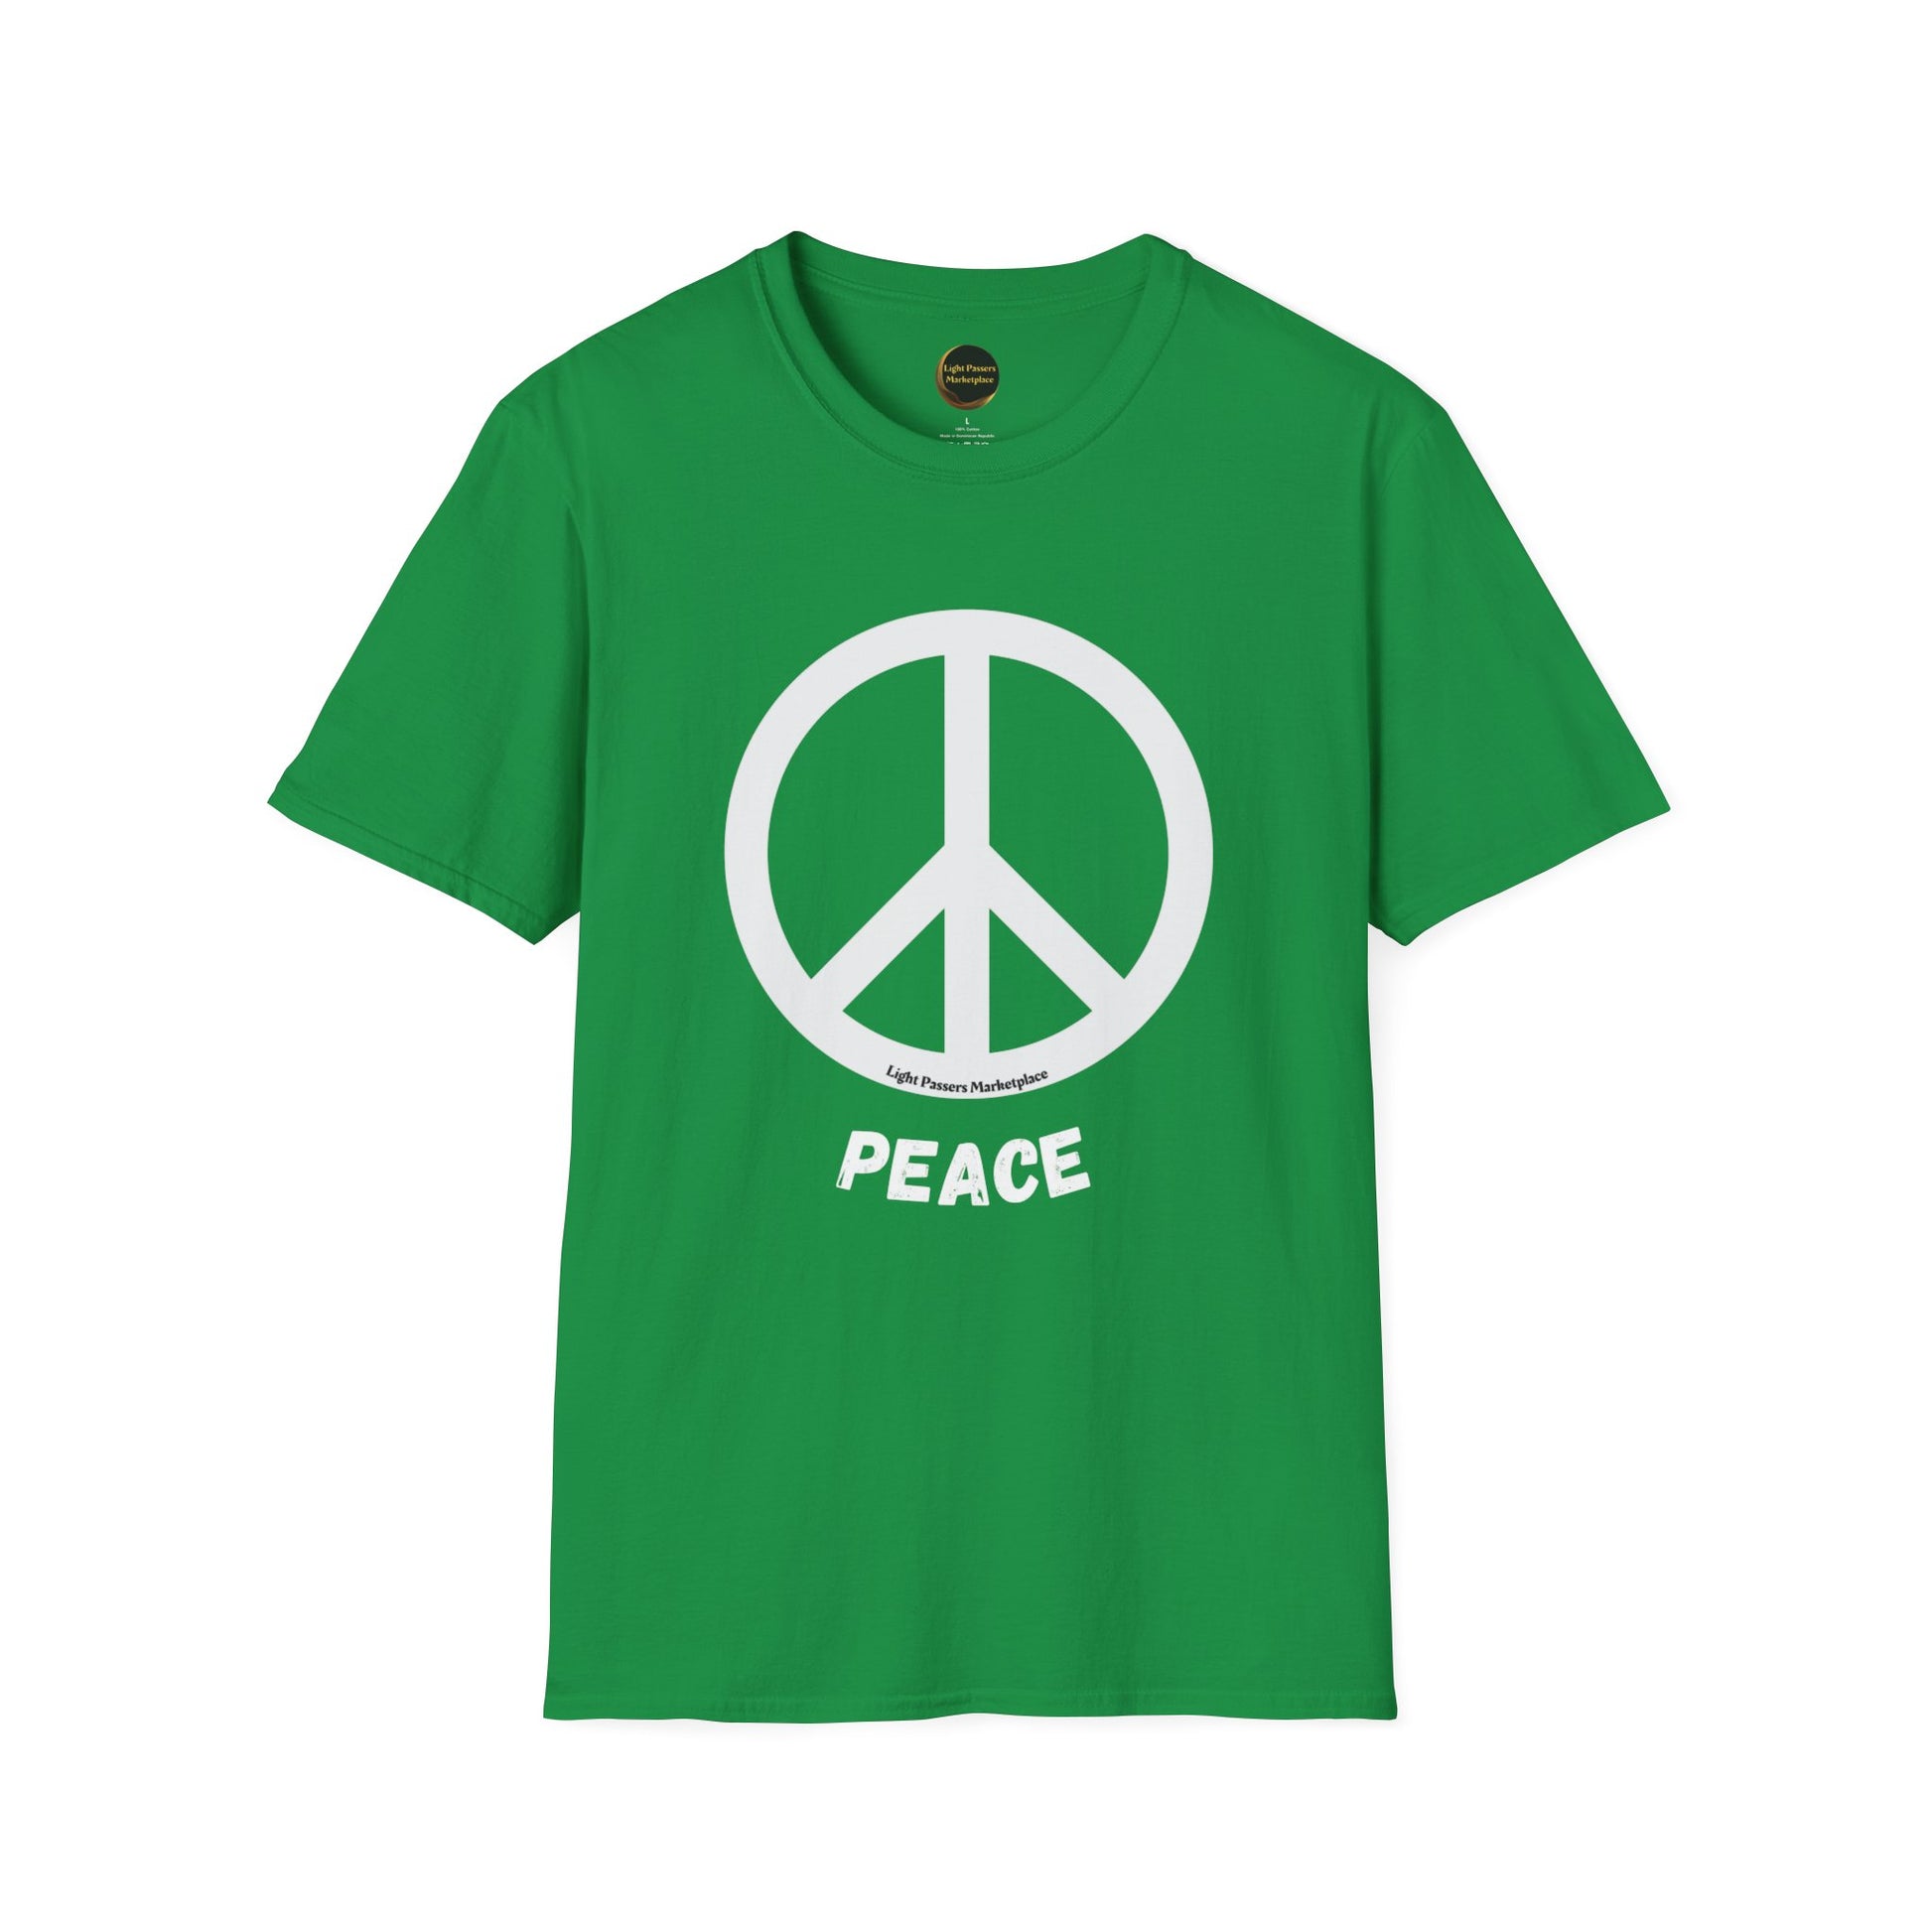 A green unisex t-shirt featuring a peace symbol, made of soft 100% cotton with twill tape shoulders and a ribbed collar. Ethically produced by Gildan with a tear-away label.